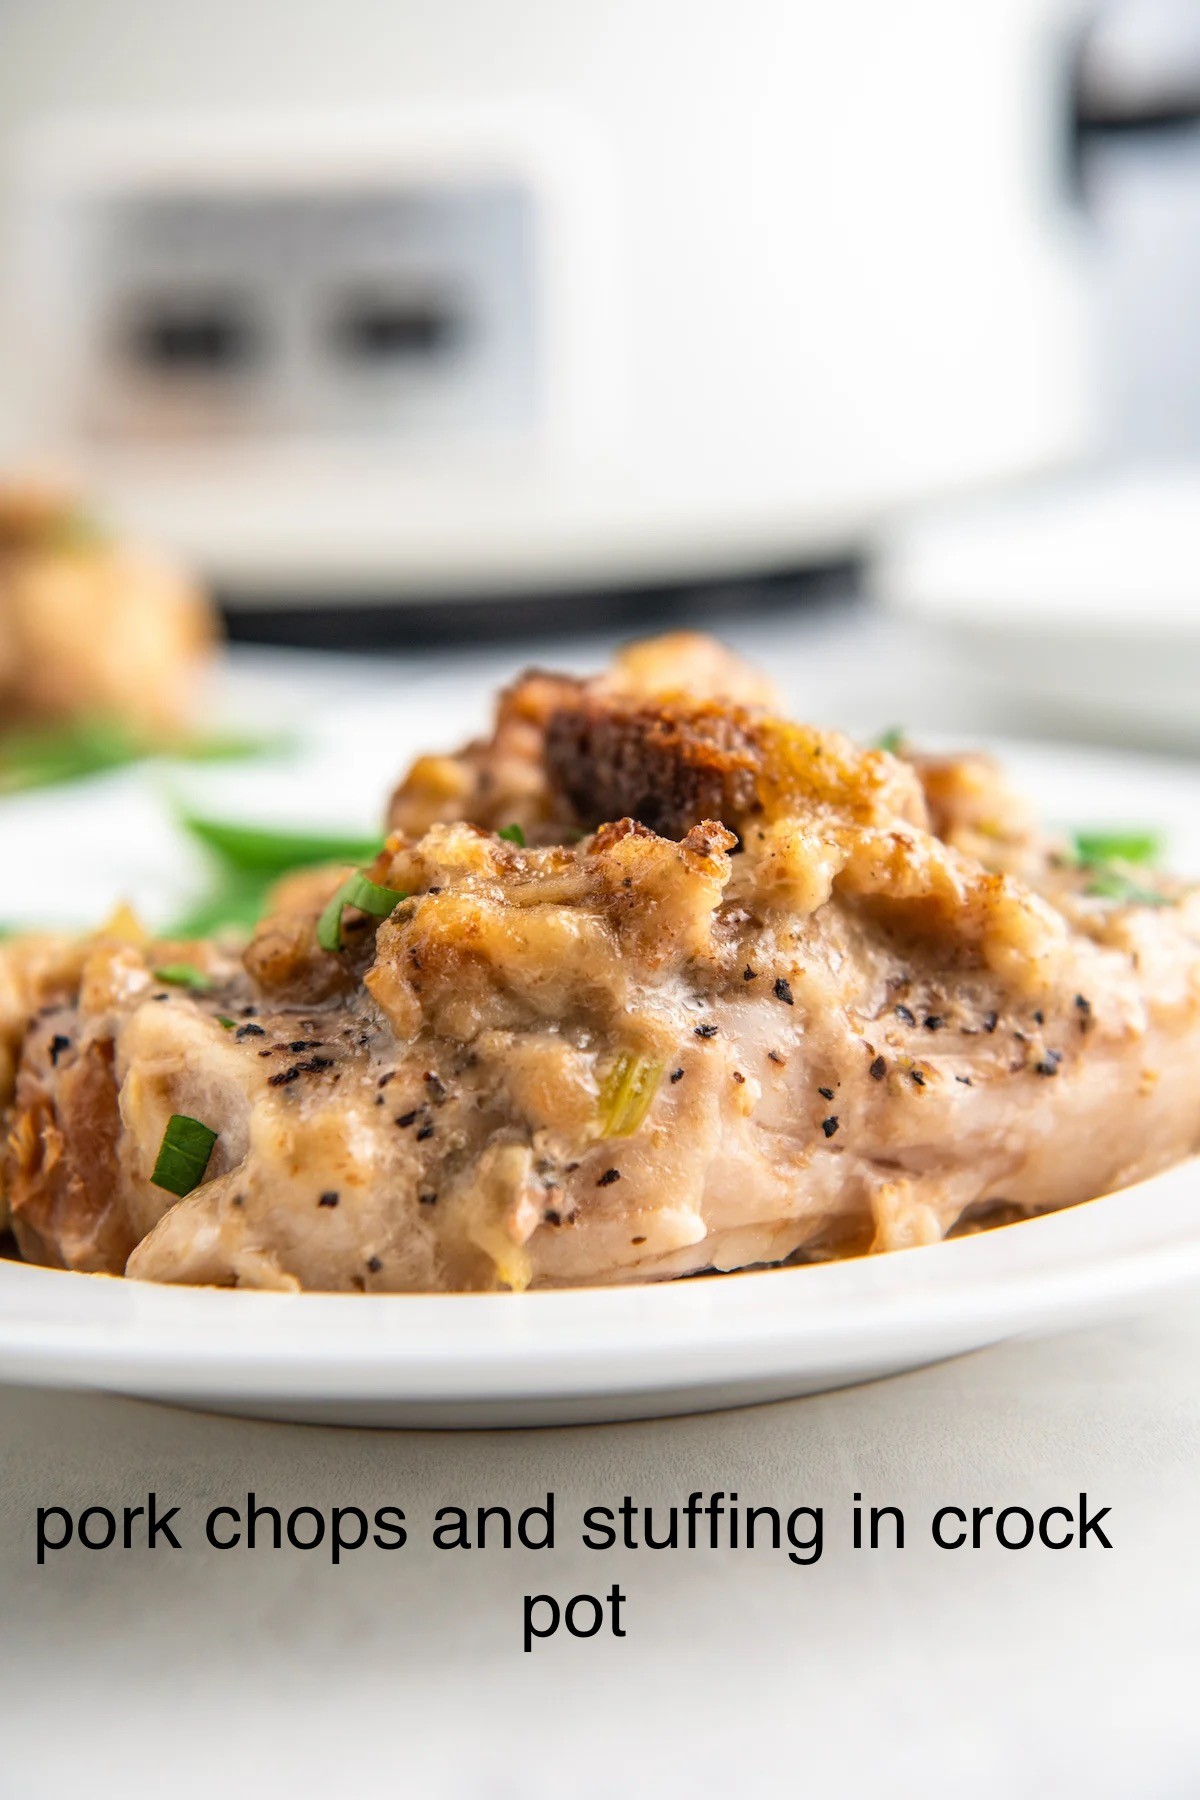 pork chops and stuffing in crock pot